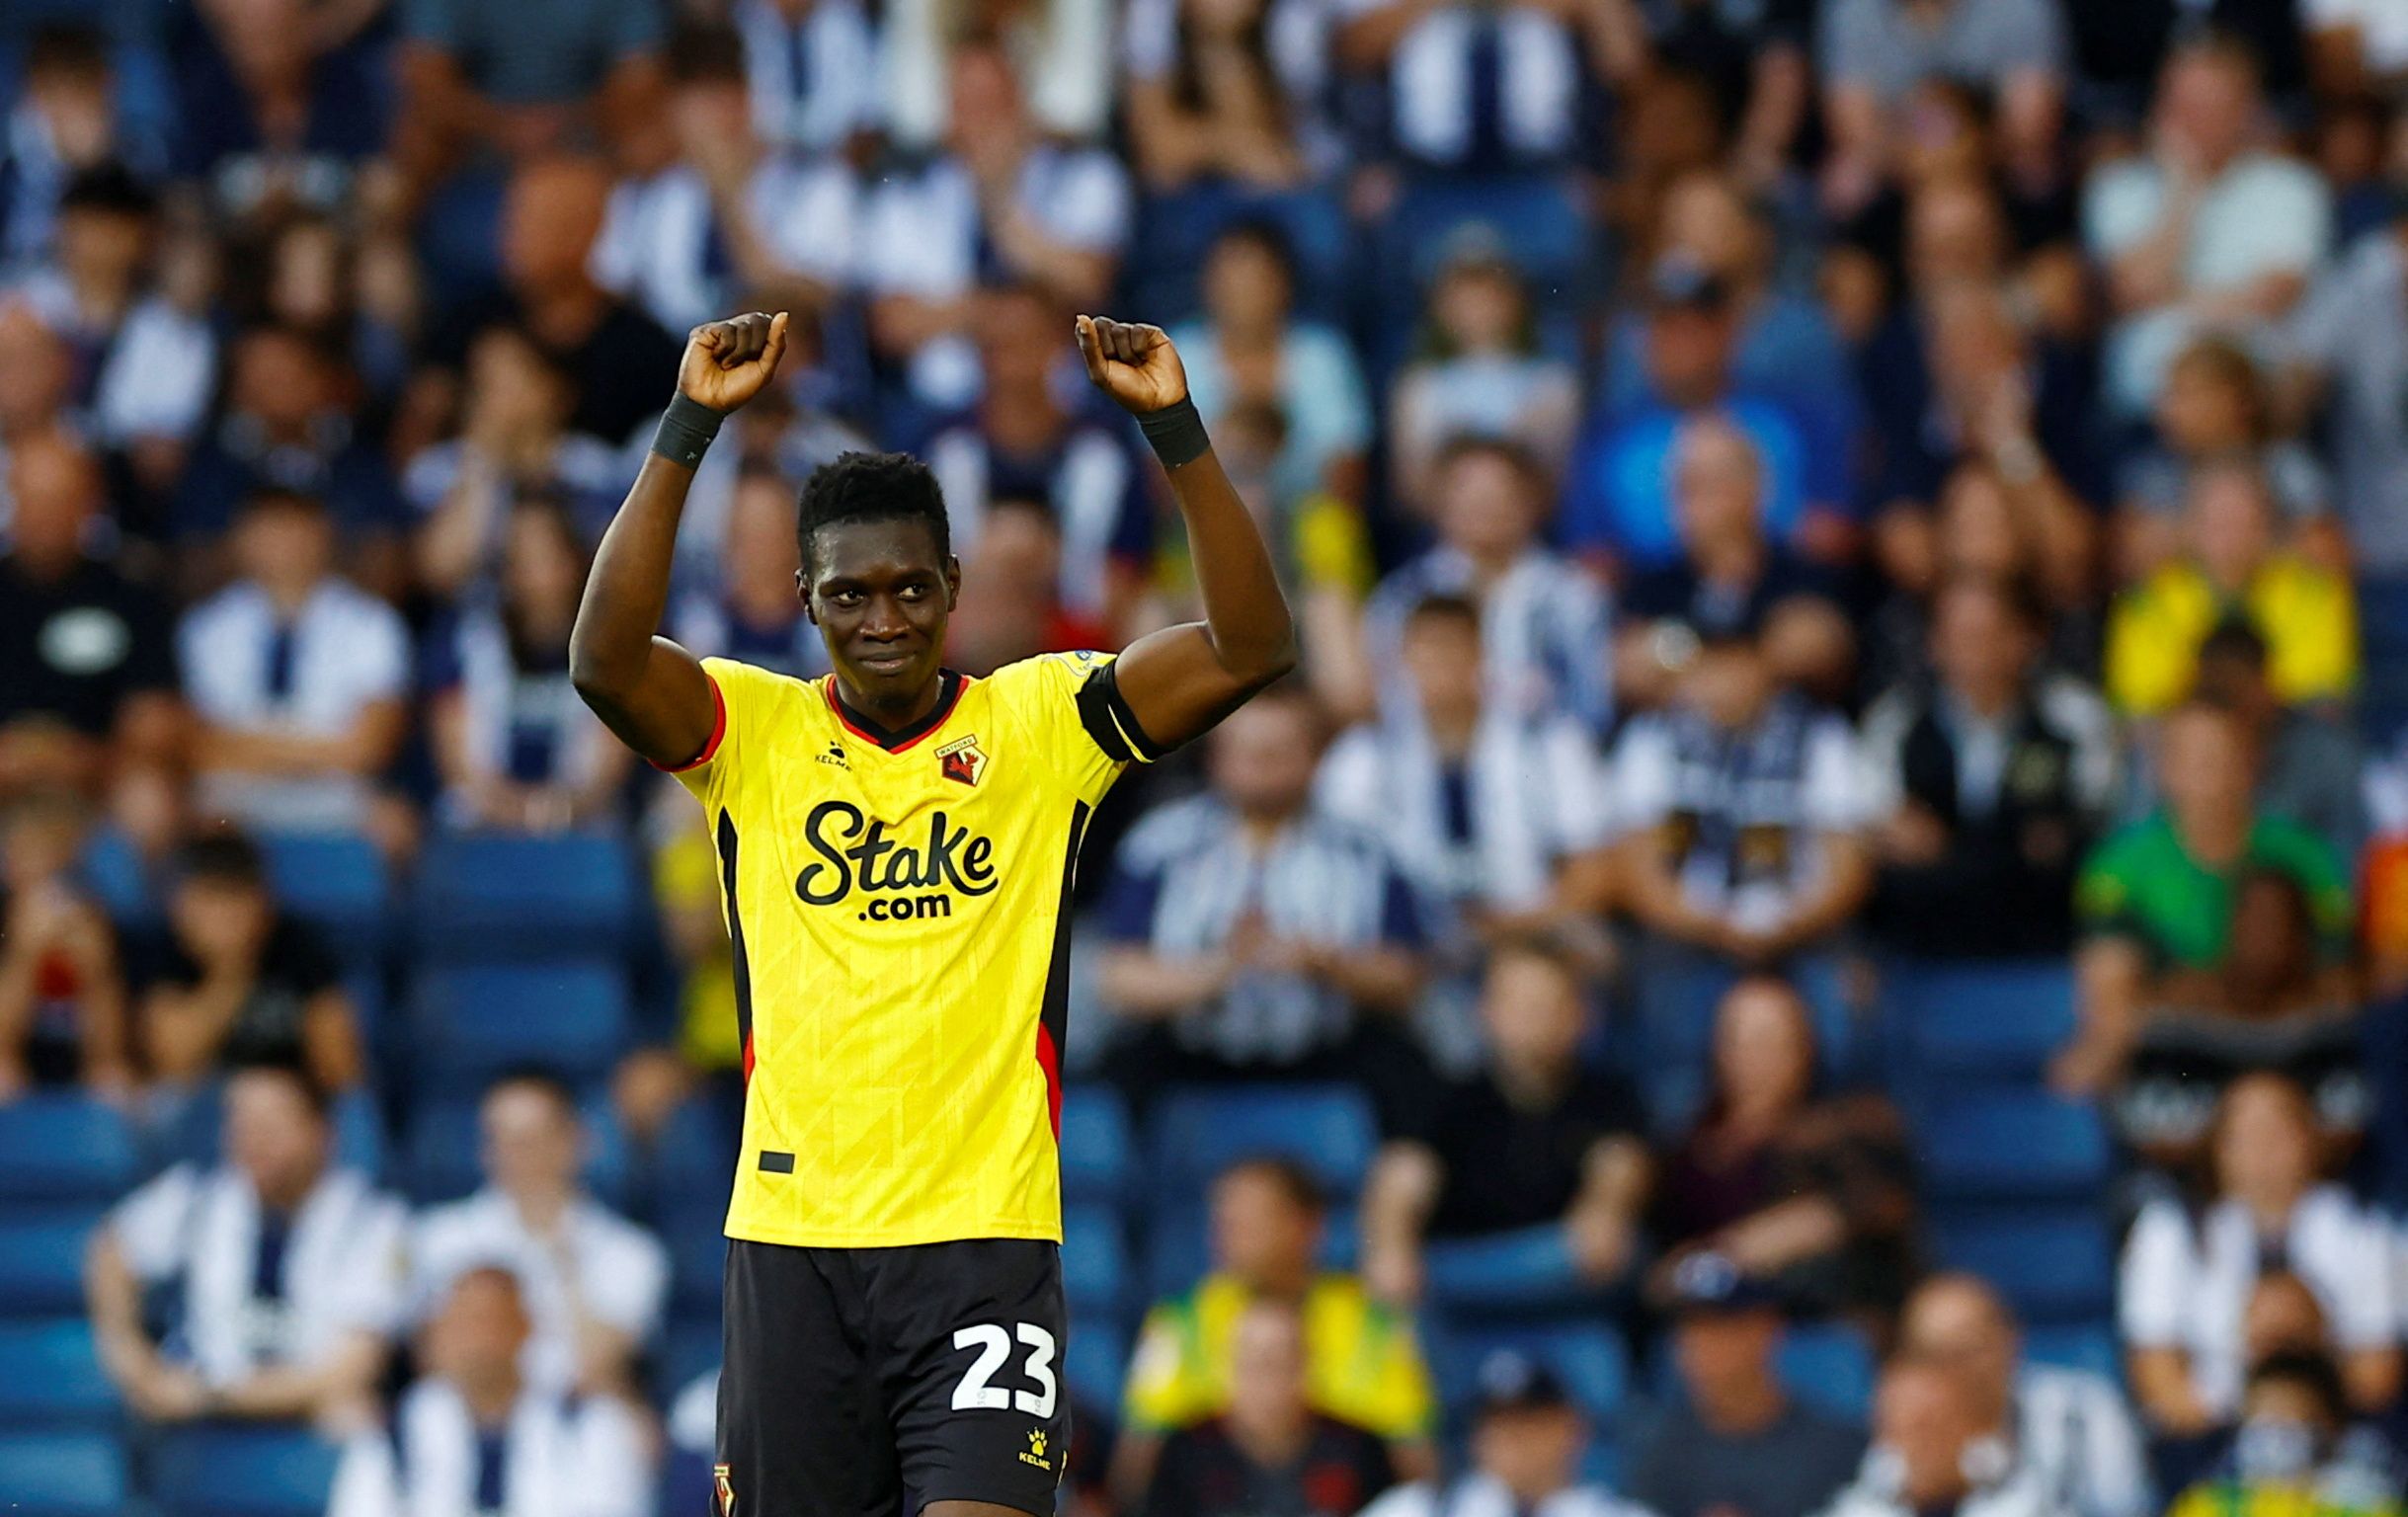 Soccer Football - Championship - West Bromwich Albion v Watford - The Hawthorns, West Bromwich, Britain - August 8, 2022  Watford's Ismaila Sarr celebrates after scoring their first goal  Action Images/Andrew Boyers  EDITORIAL USE ONLY. No use with unauthorized audio, video, data, fixture lists, club/league logos or 